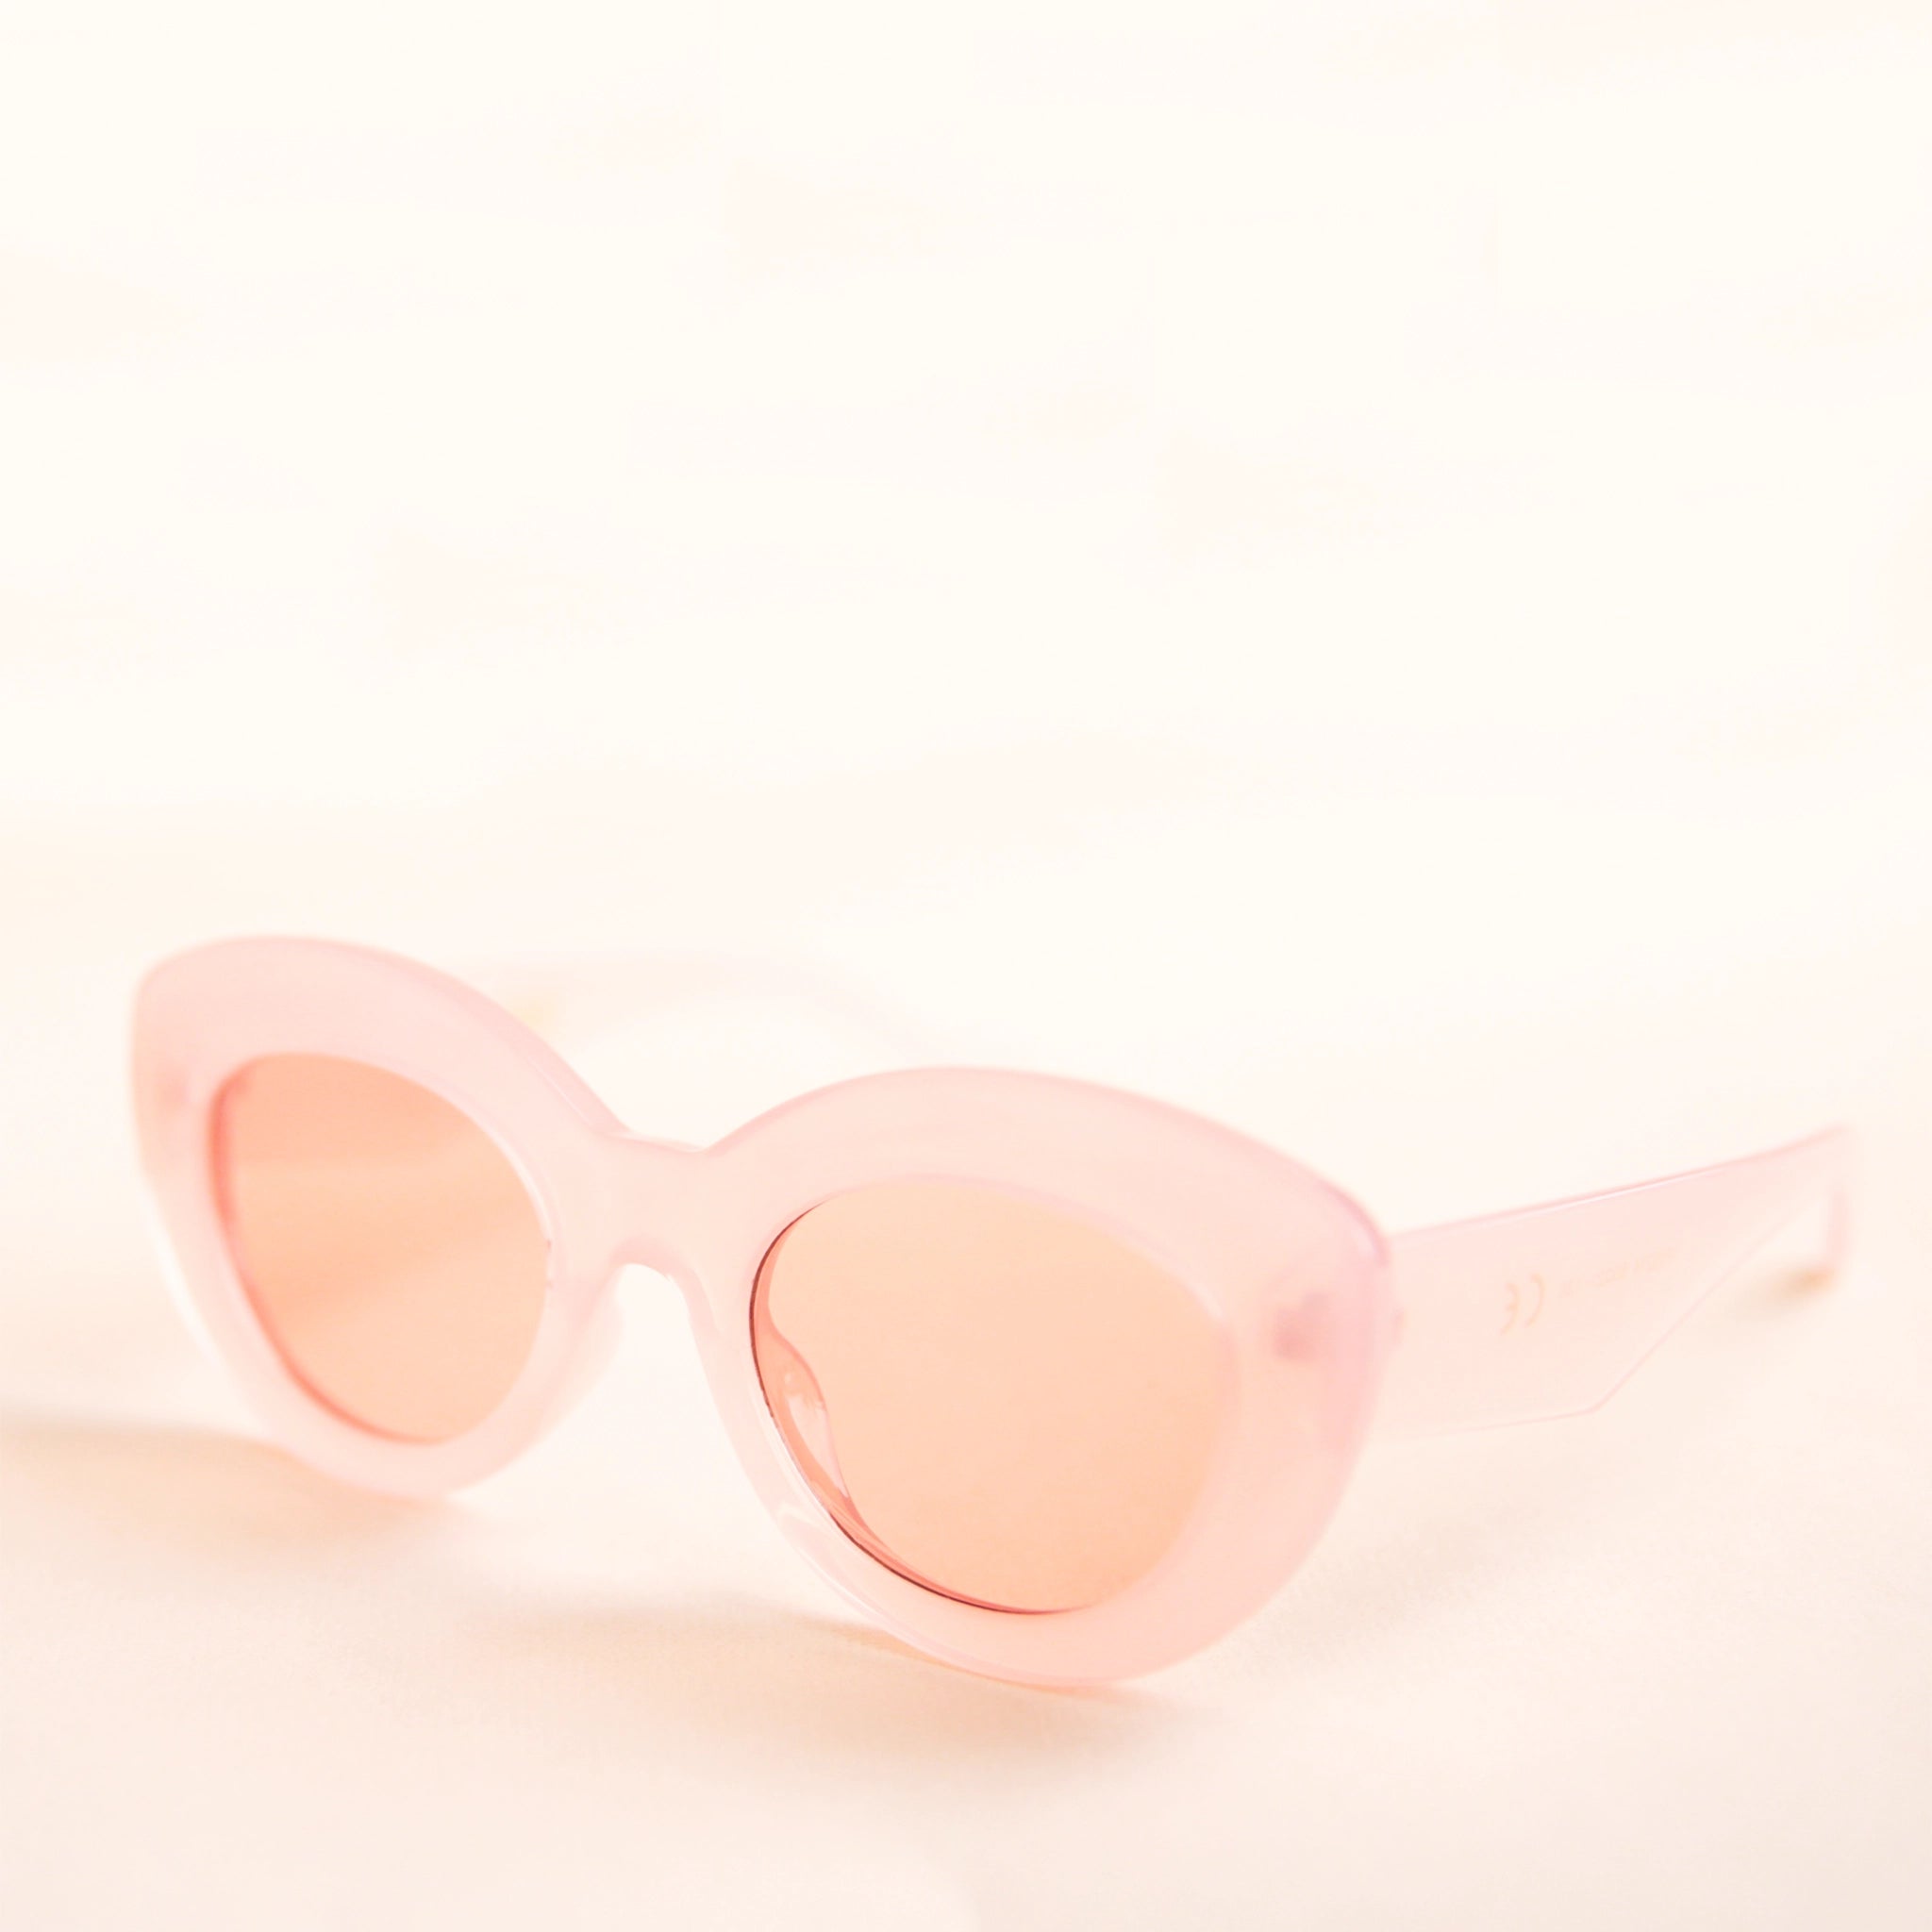 On a neutral background is the Gemma Sunglasses in a light pink shade. They have a rounded shape with a slight cateye flair at the corners. The frame material is a durable plastic and the lenses are a similar tone.